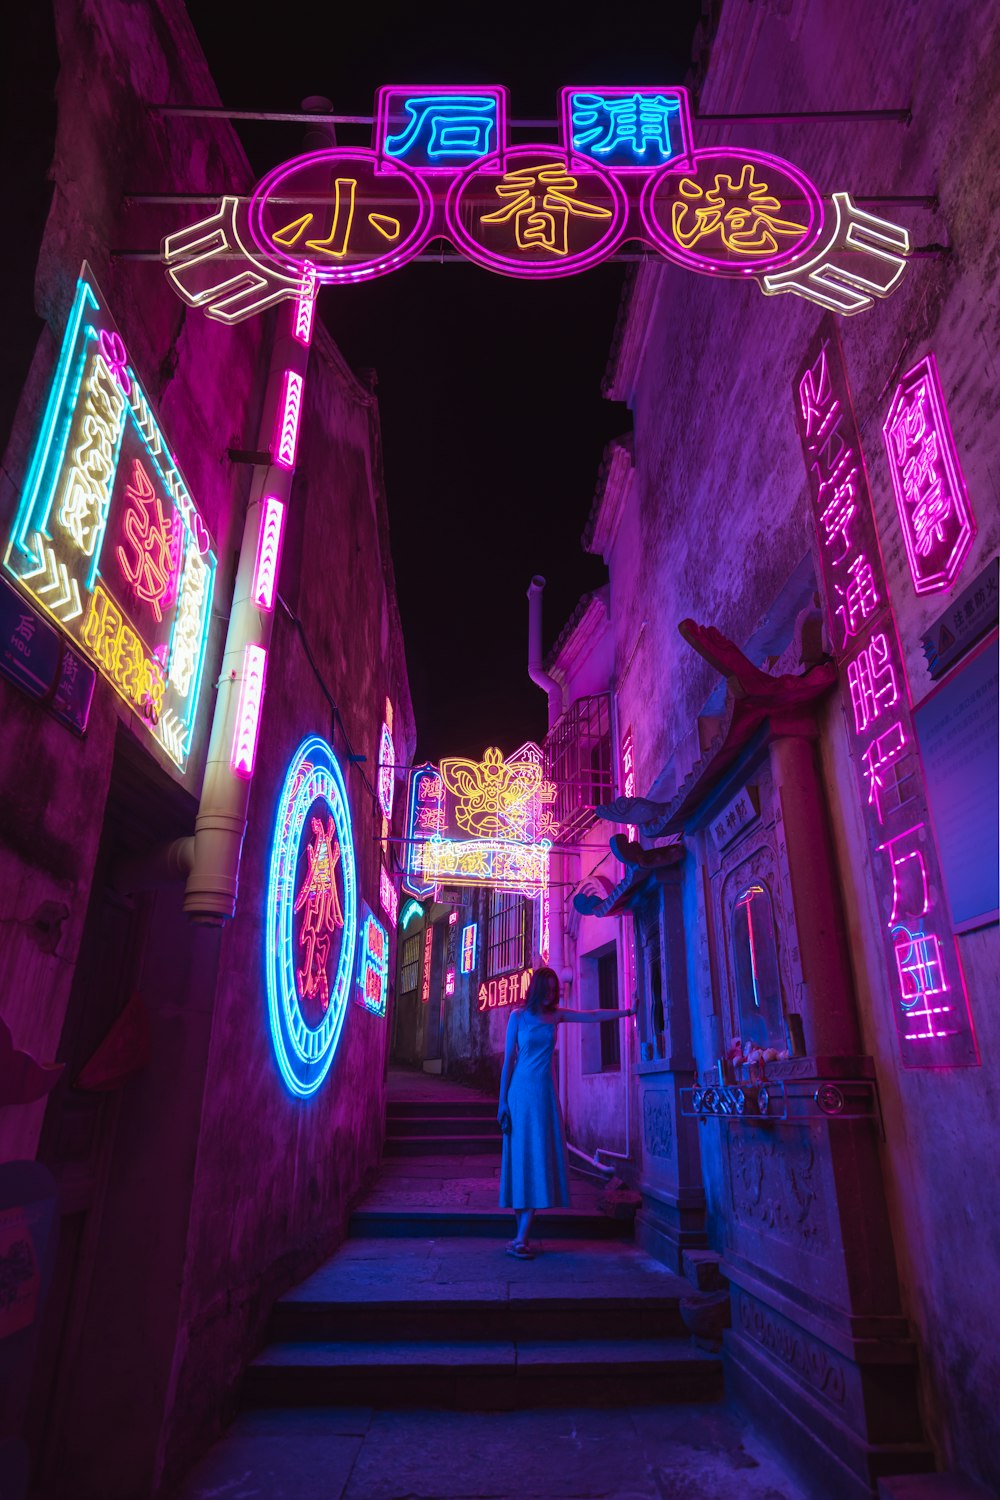 a person walking down a stairway in a lit up alley